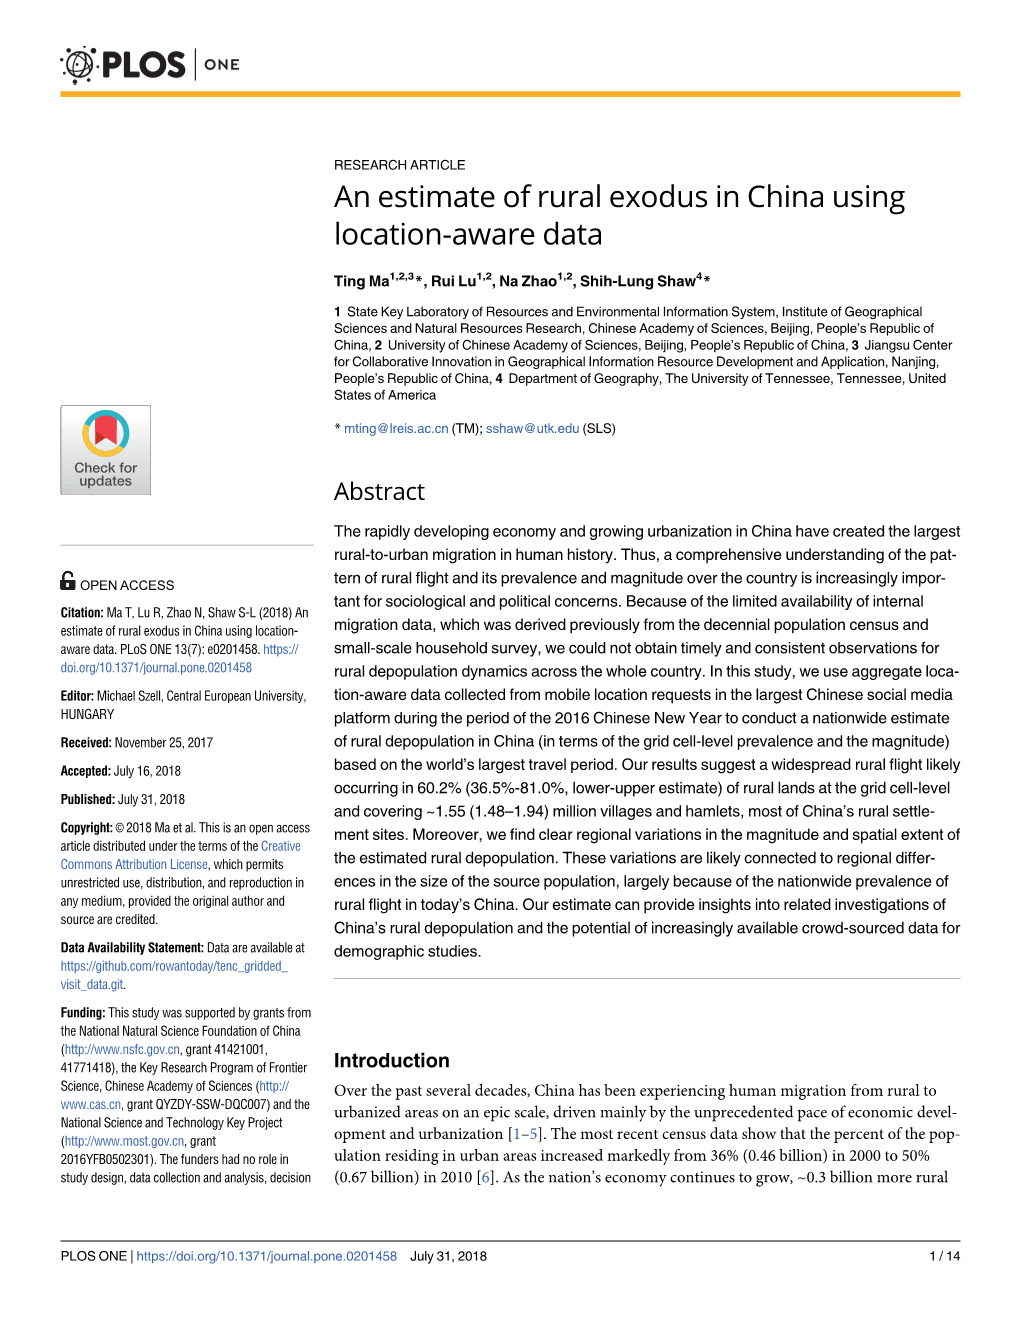 An Estimate of Rural Exodus in China Using Location-Aware Data